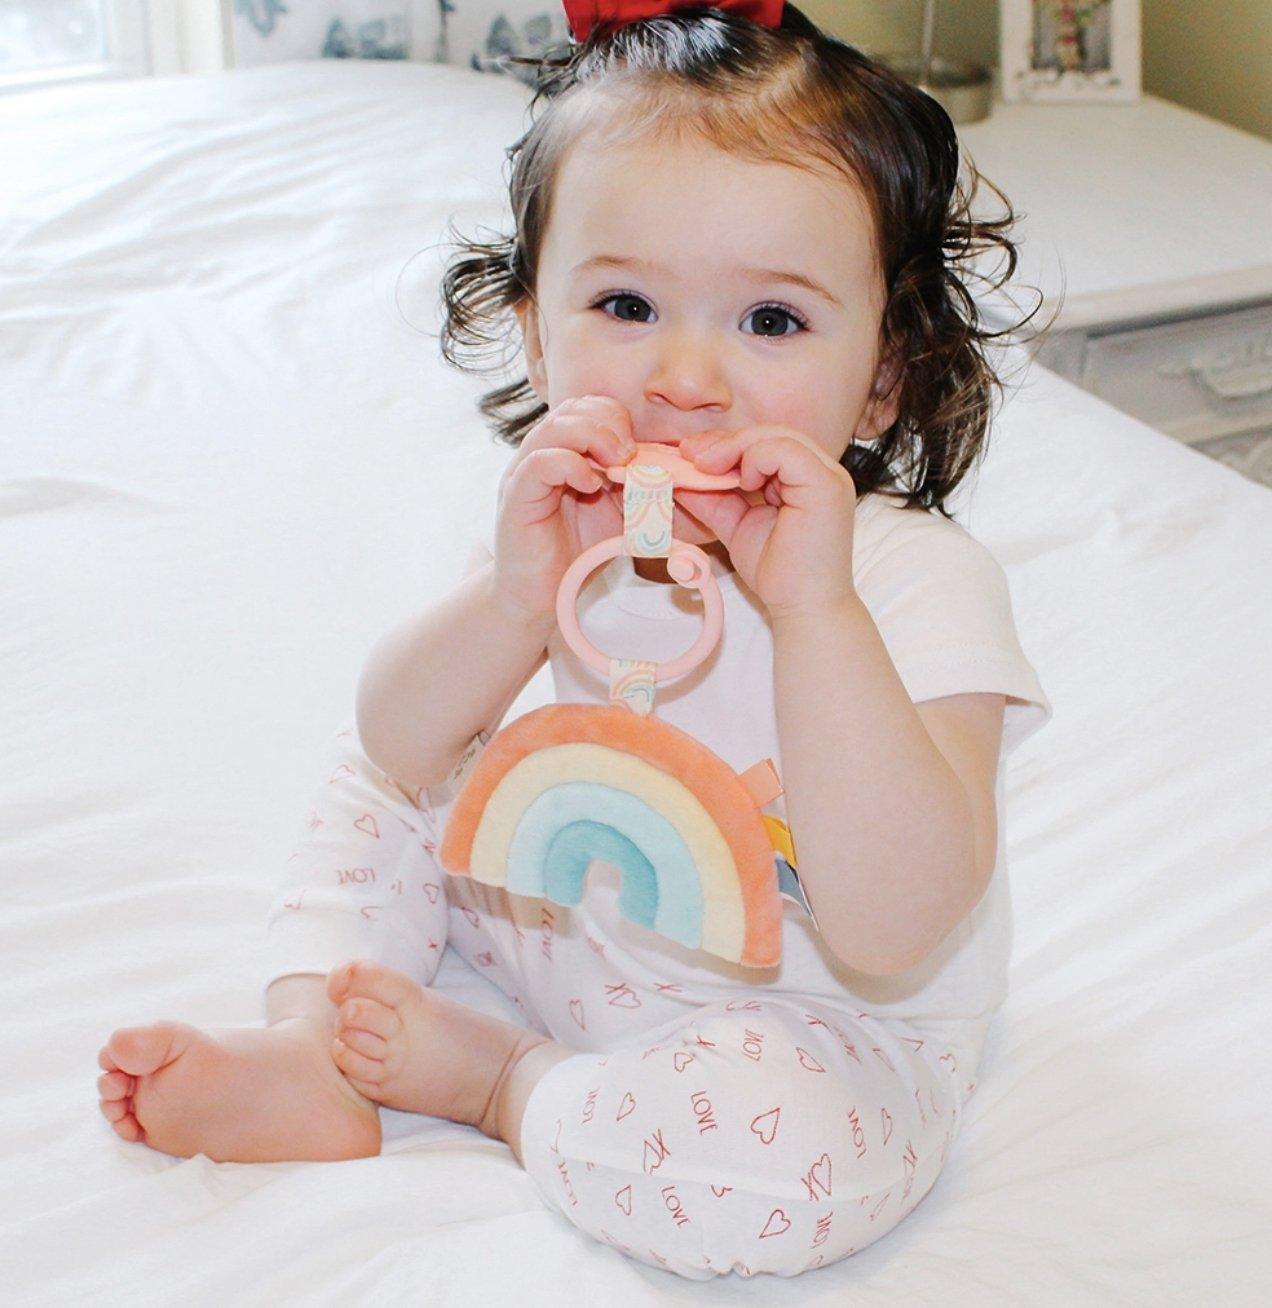 NEW Itzy Pal Plush + Teether Baby in Styles